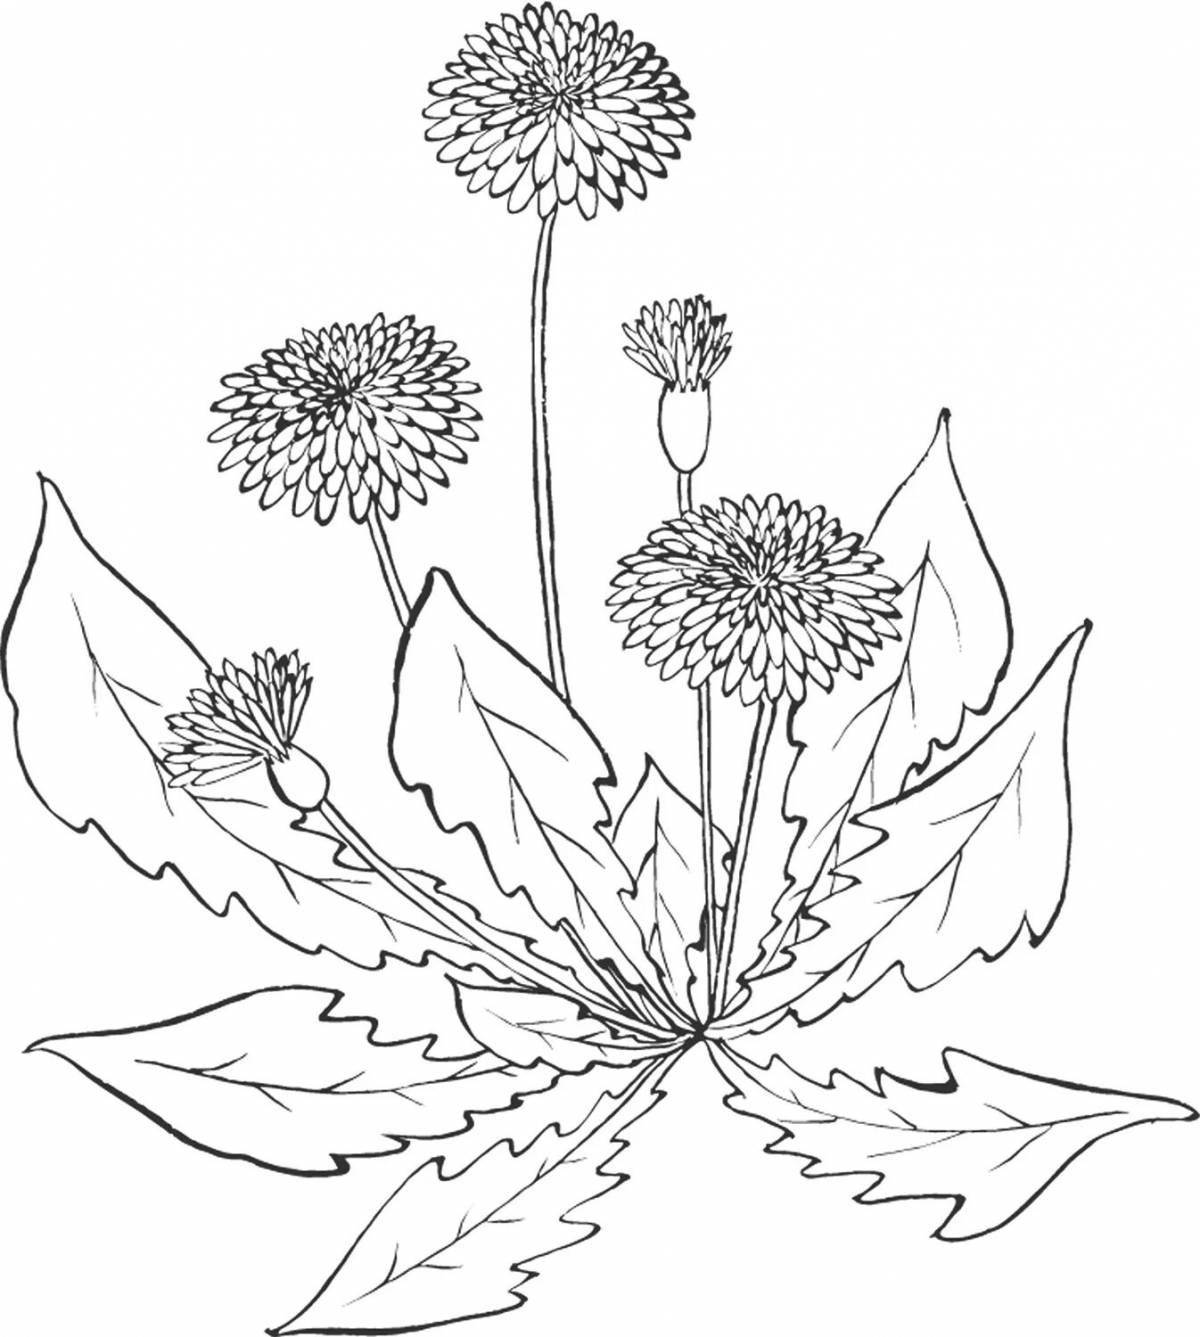 Glowing dandelion coloring page for kids